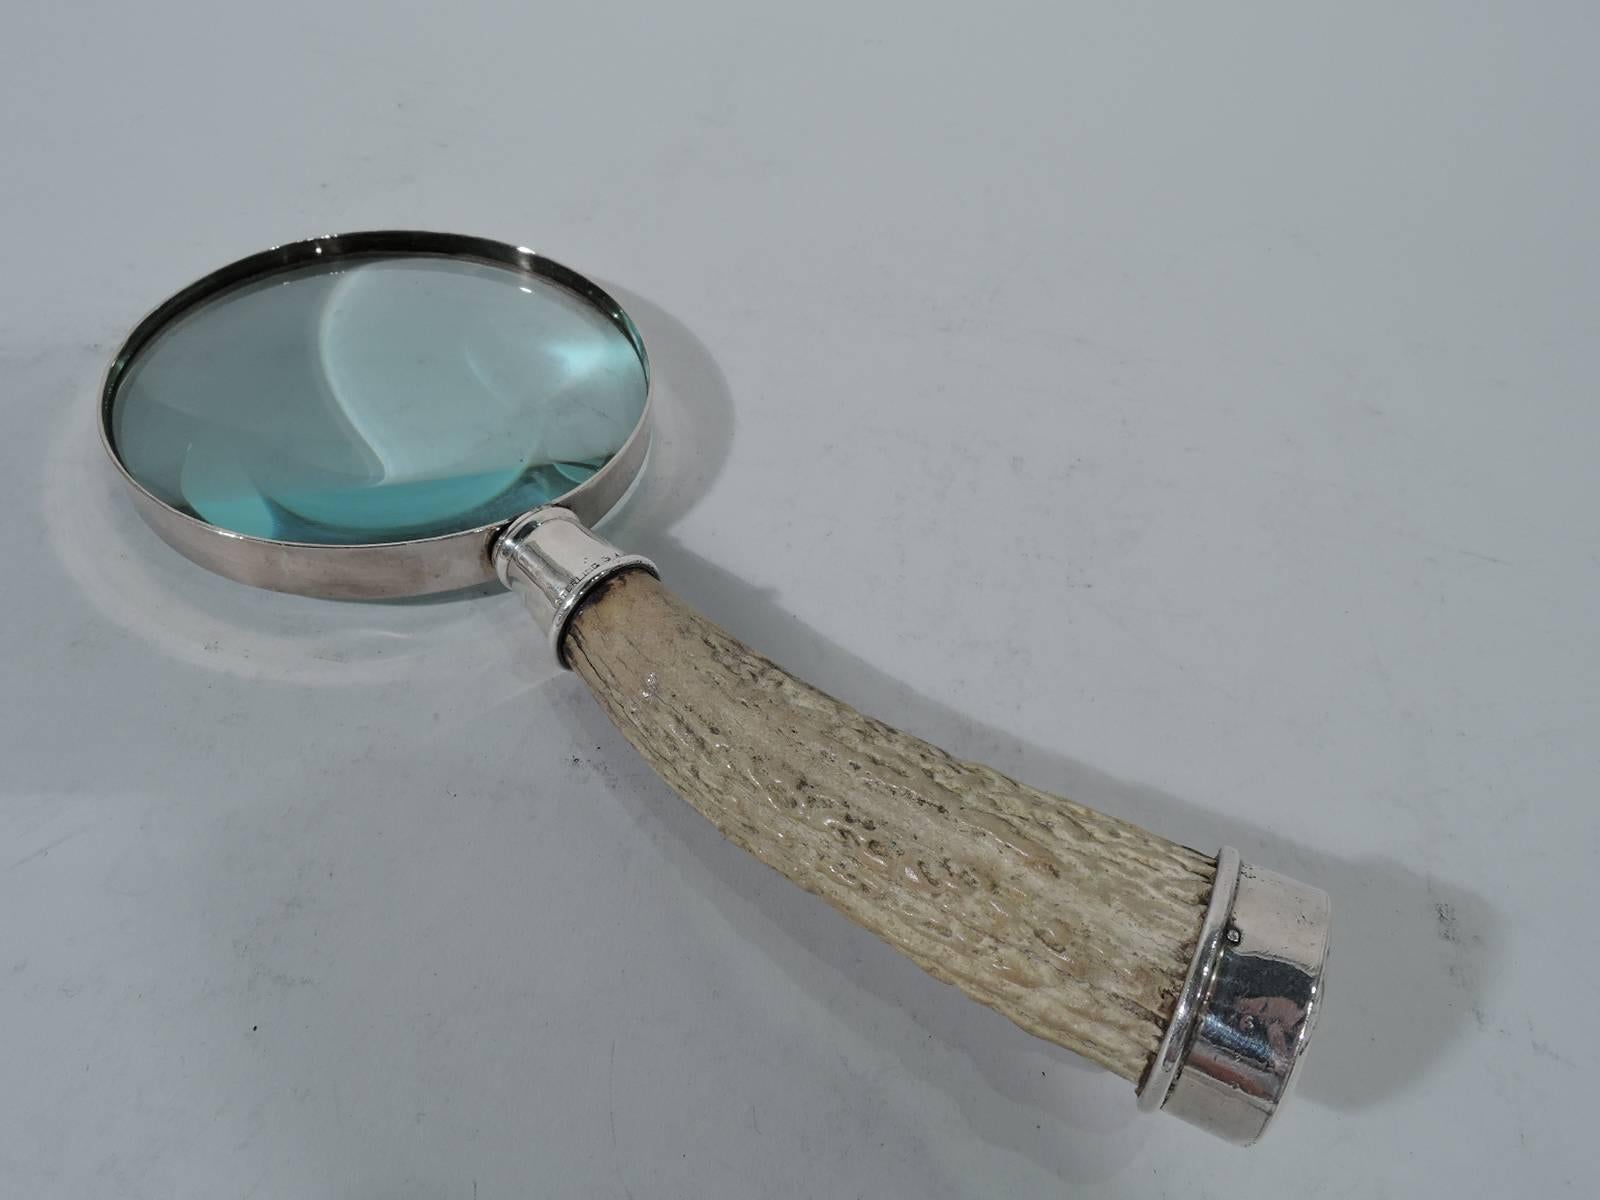 Big game-era sterling silver magnifying glass with horn handle. Circular and framed lens mounted to curved horn handle with sterling silver mounts (end mount vacant). Tactile easy-grip texture. A great period piece for the alpha in your life.